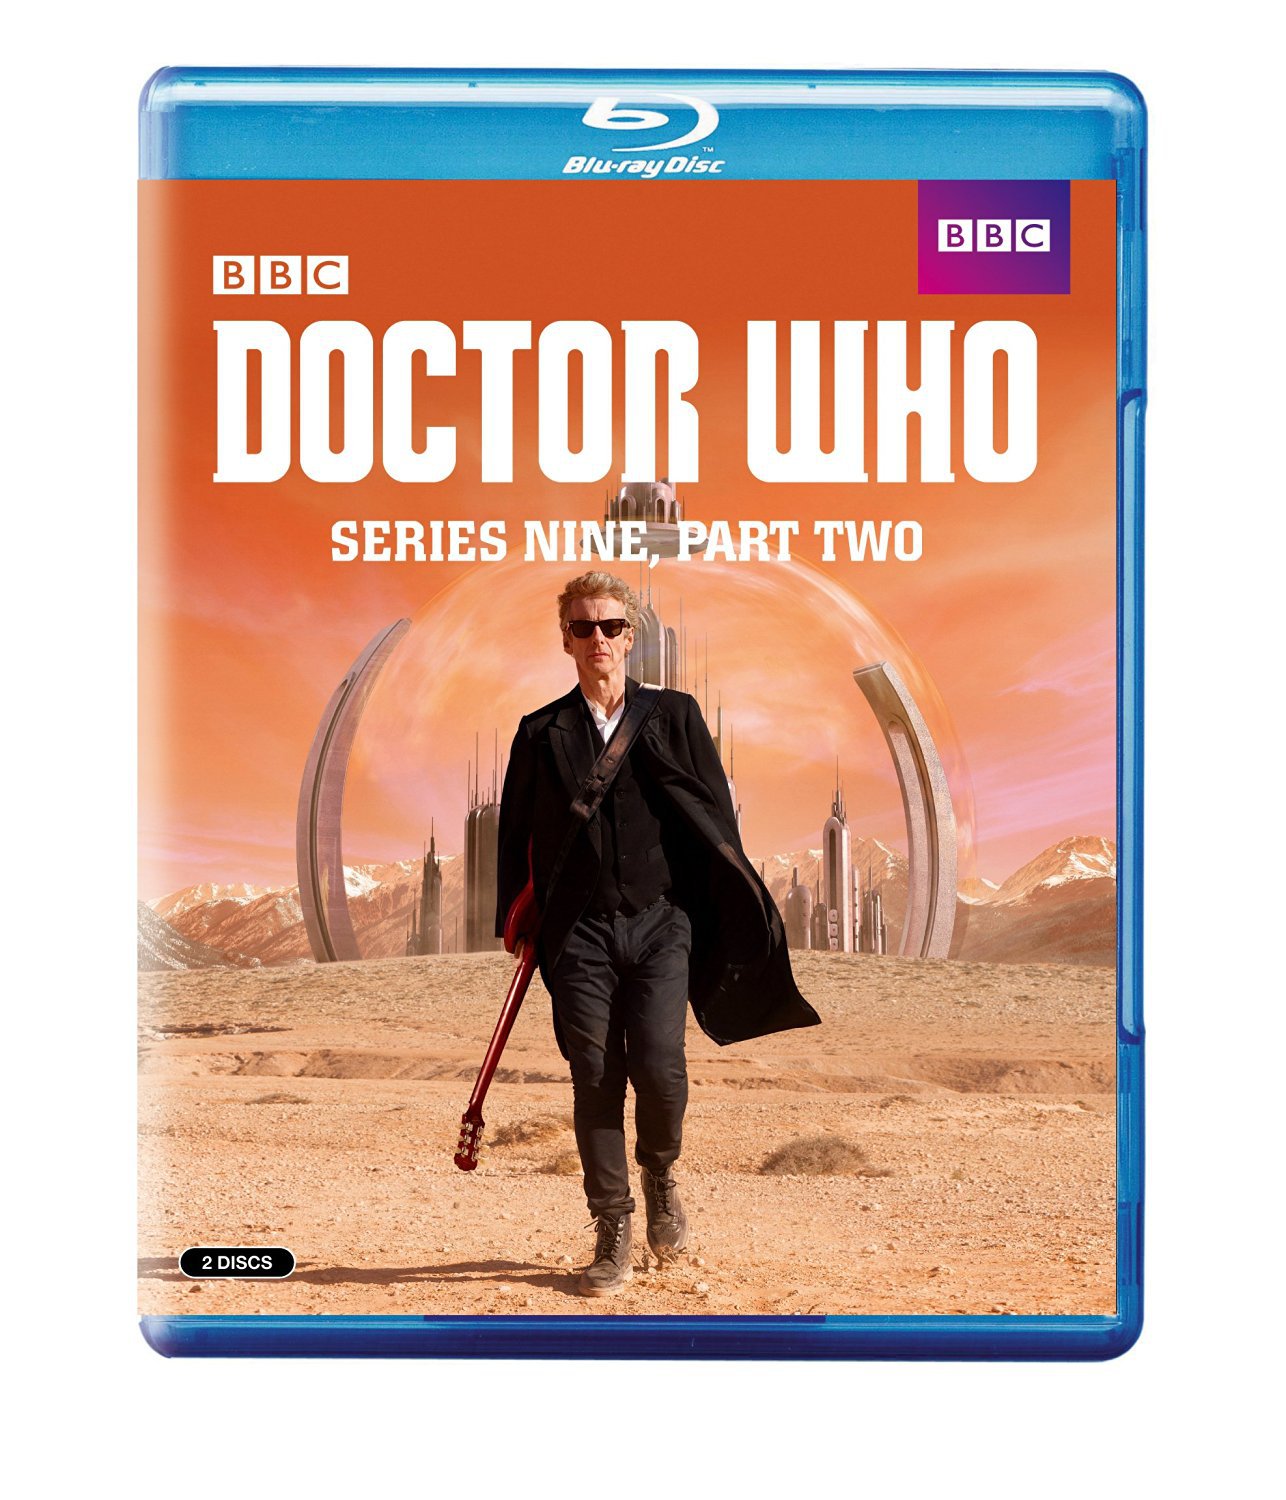 Doctor Who: Series 9, Part 2